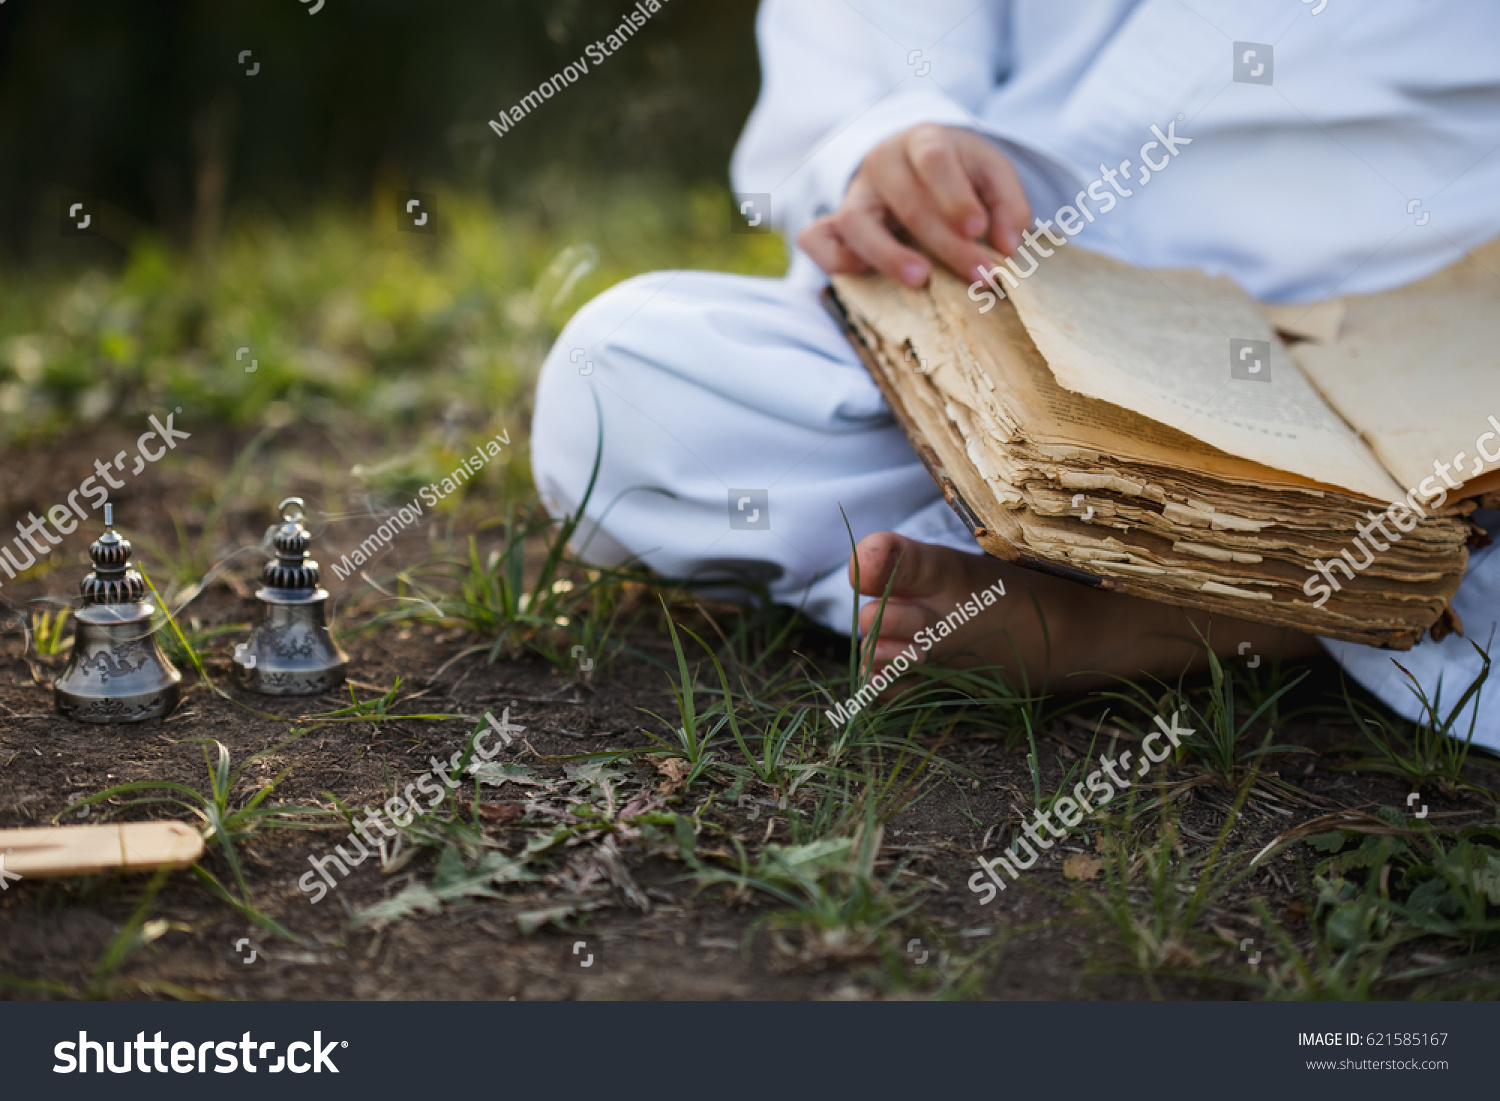 Boy in a kimono sits in a  yoga lotus position meditating, reading old open book of wisdom and there are a number  Tibetan bells  and burn incense at meadow #621585167